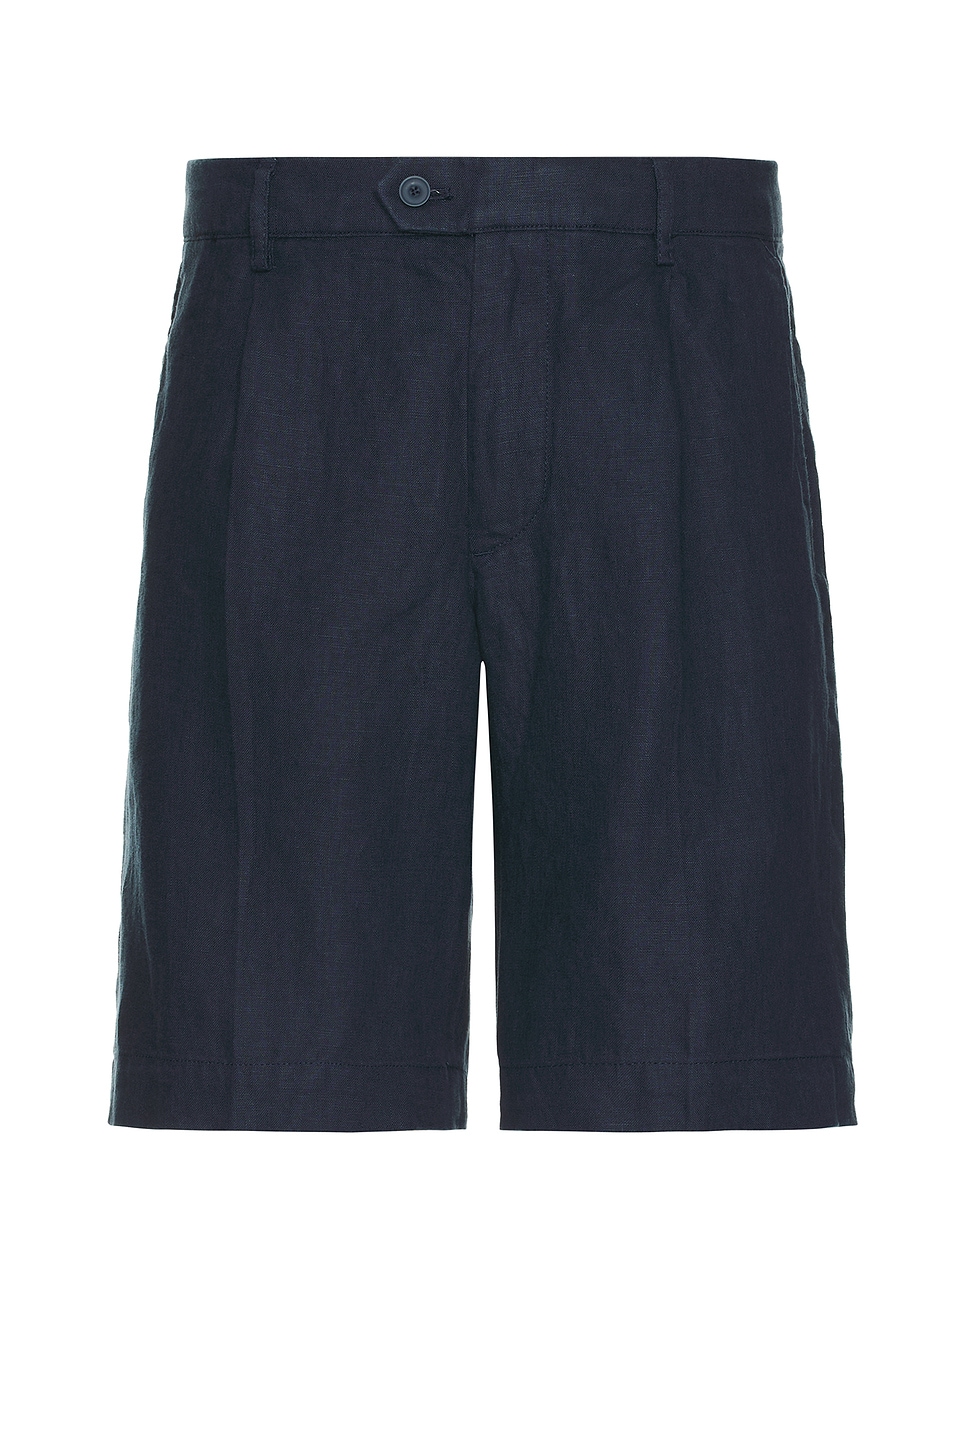 Image 1 of Club Monaco Pleated Linen Short in Navy Base